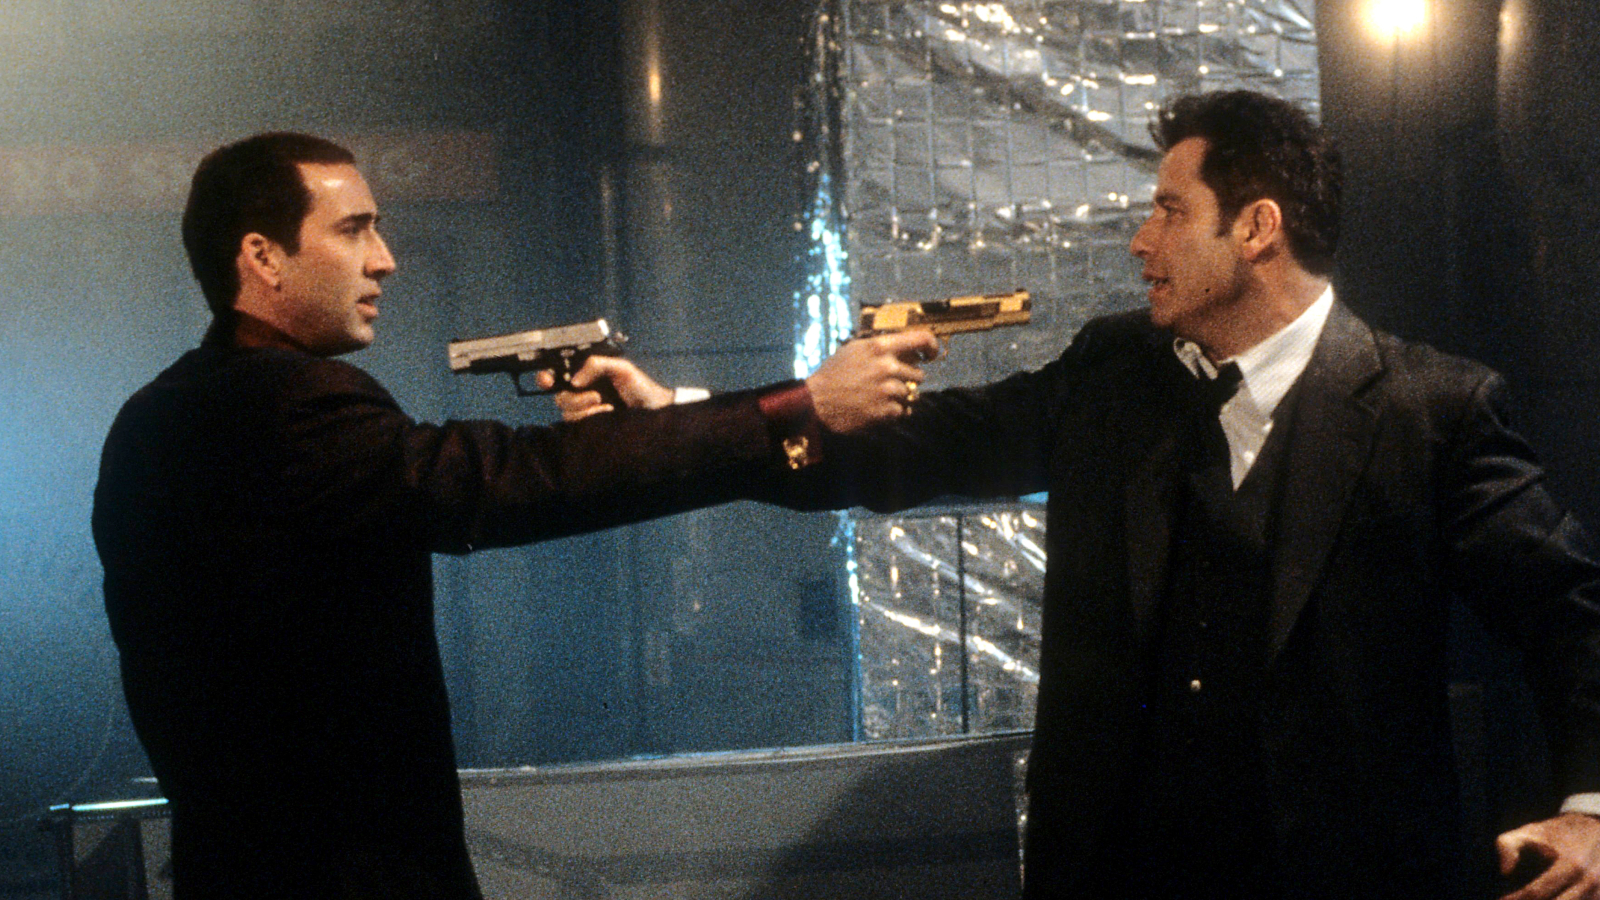 Will there be a ‘Face/Off 2’ and would Nicolas Cage and John Travolta return?